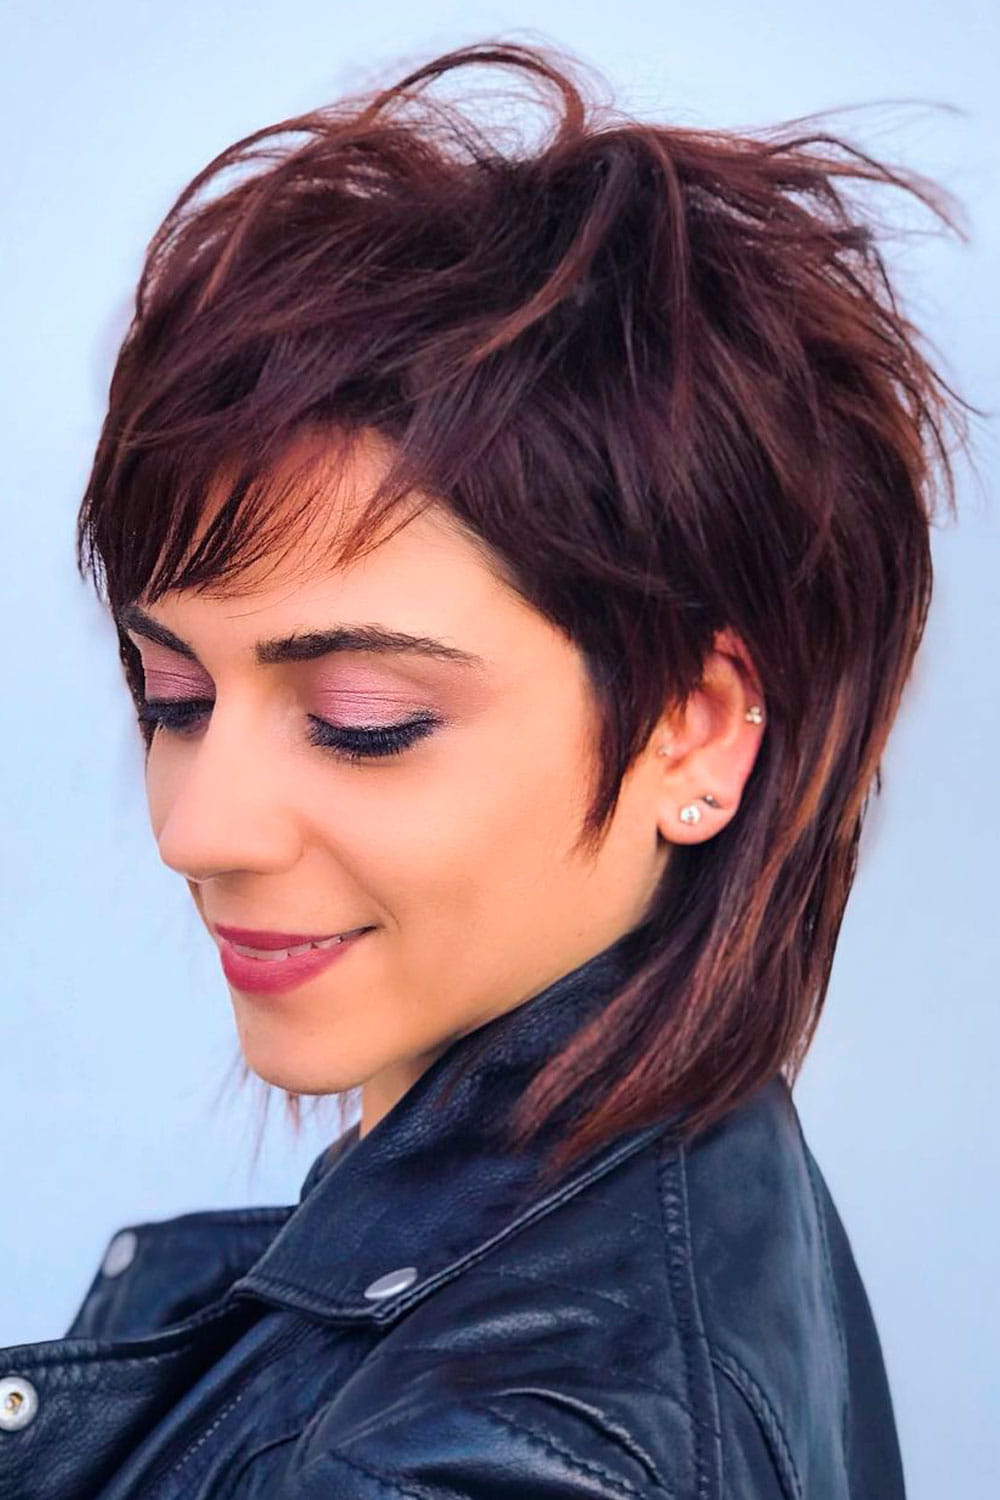 100+ Best Short Hairstyles & Haircuts For Women In 2023 images 80